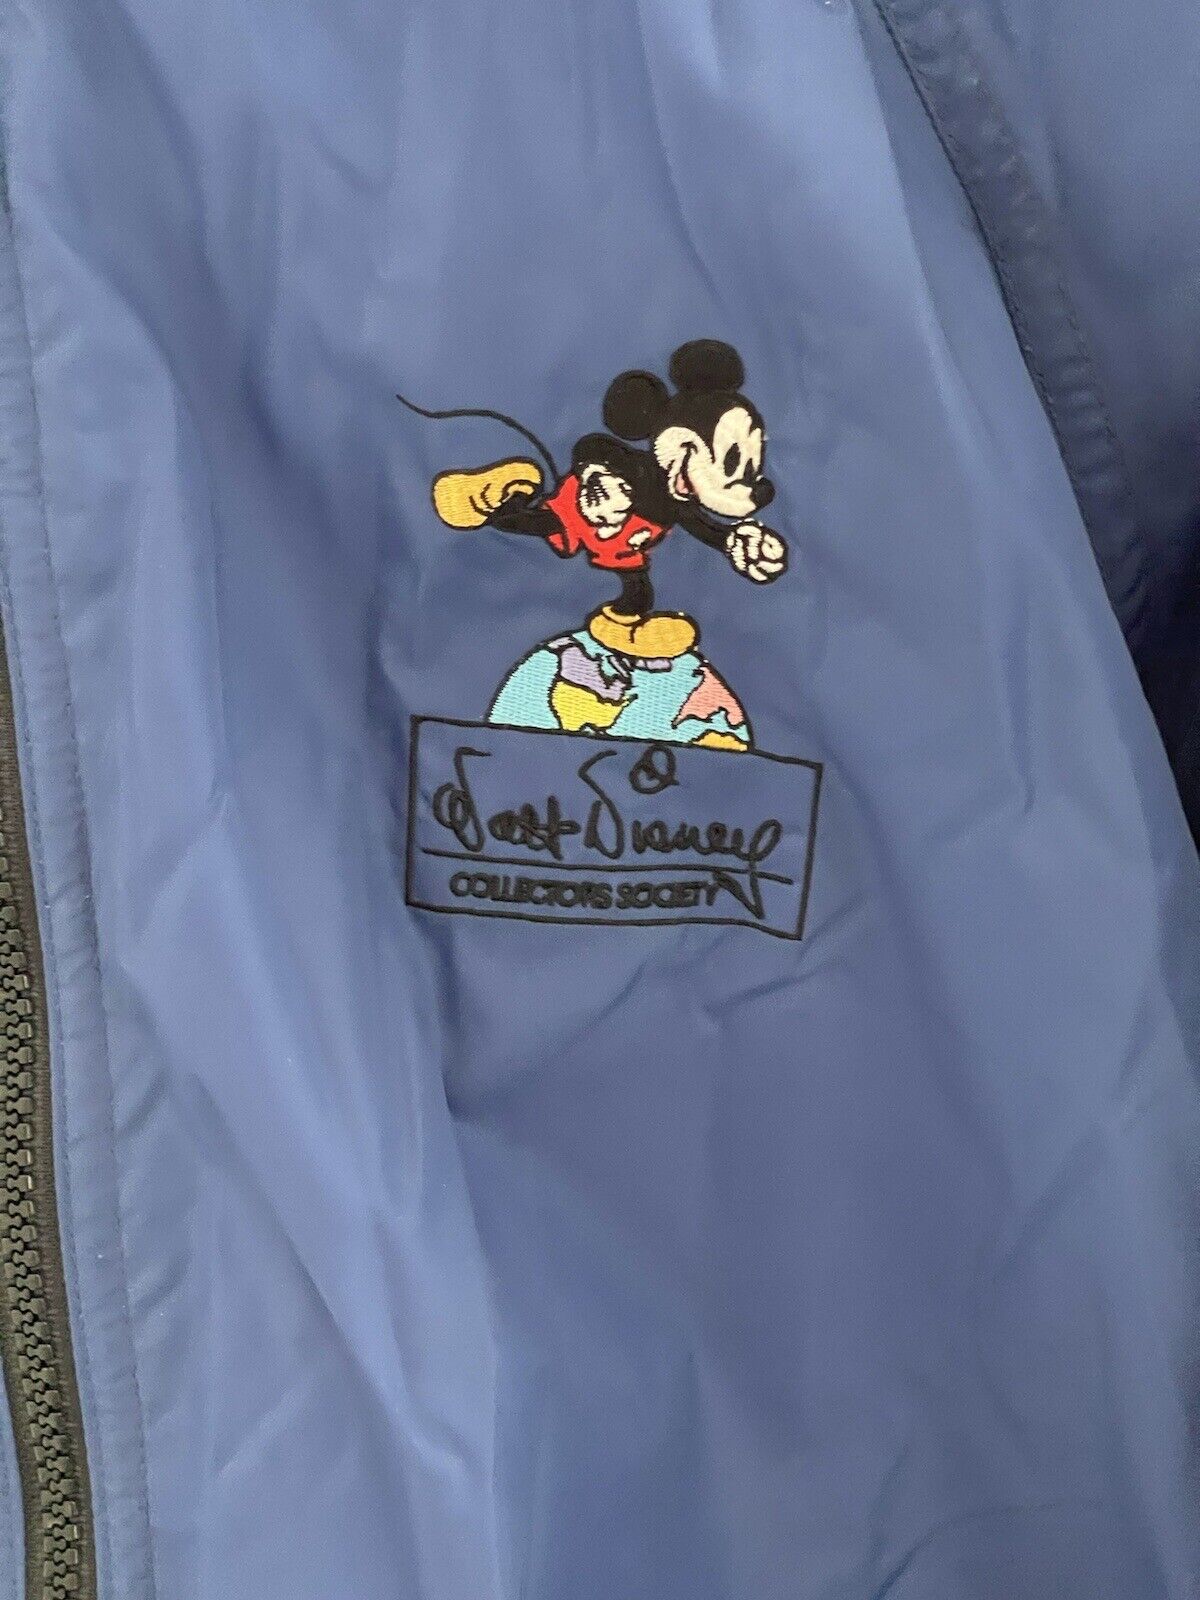 VINTAGE WALT DISNEY Mickey Mouse Collectors Society Reversible Jacket Large